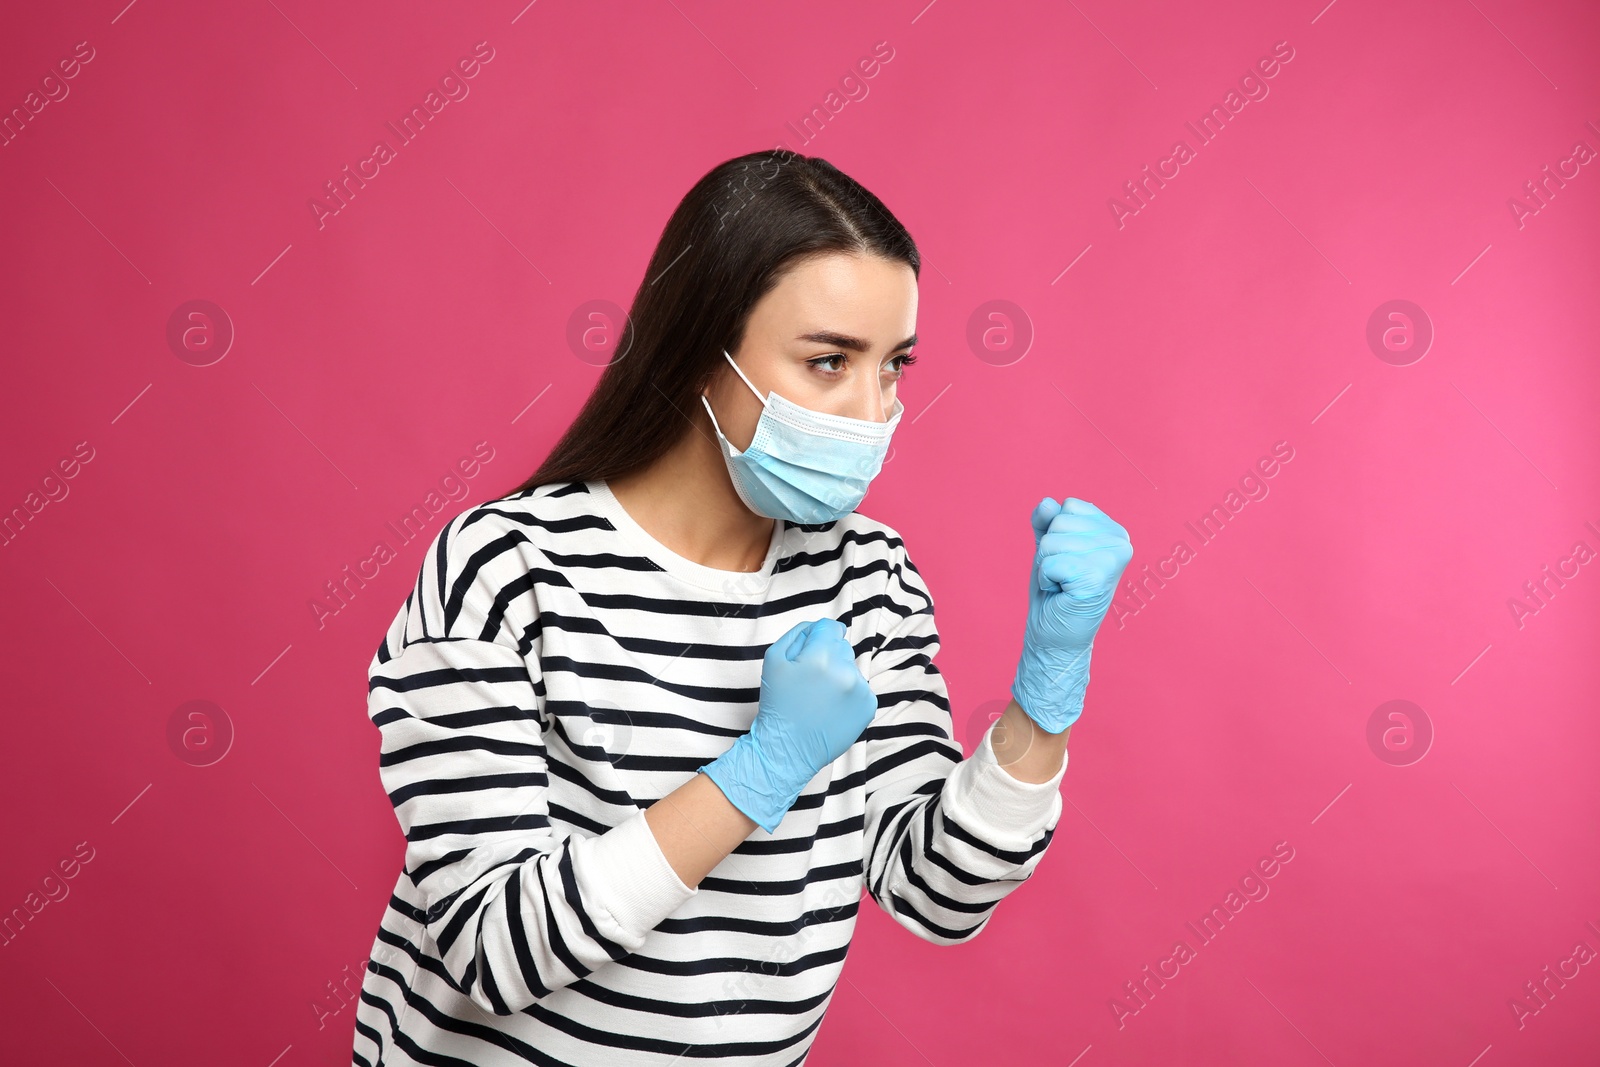 Photo of Woman with protective mask and gloves in fighting pose on pink background. Strong immunity concept